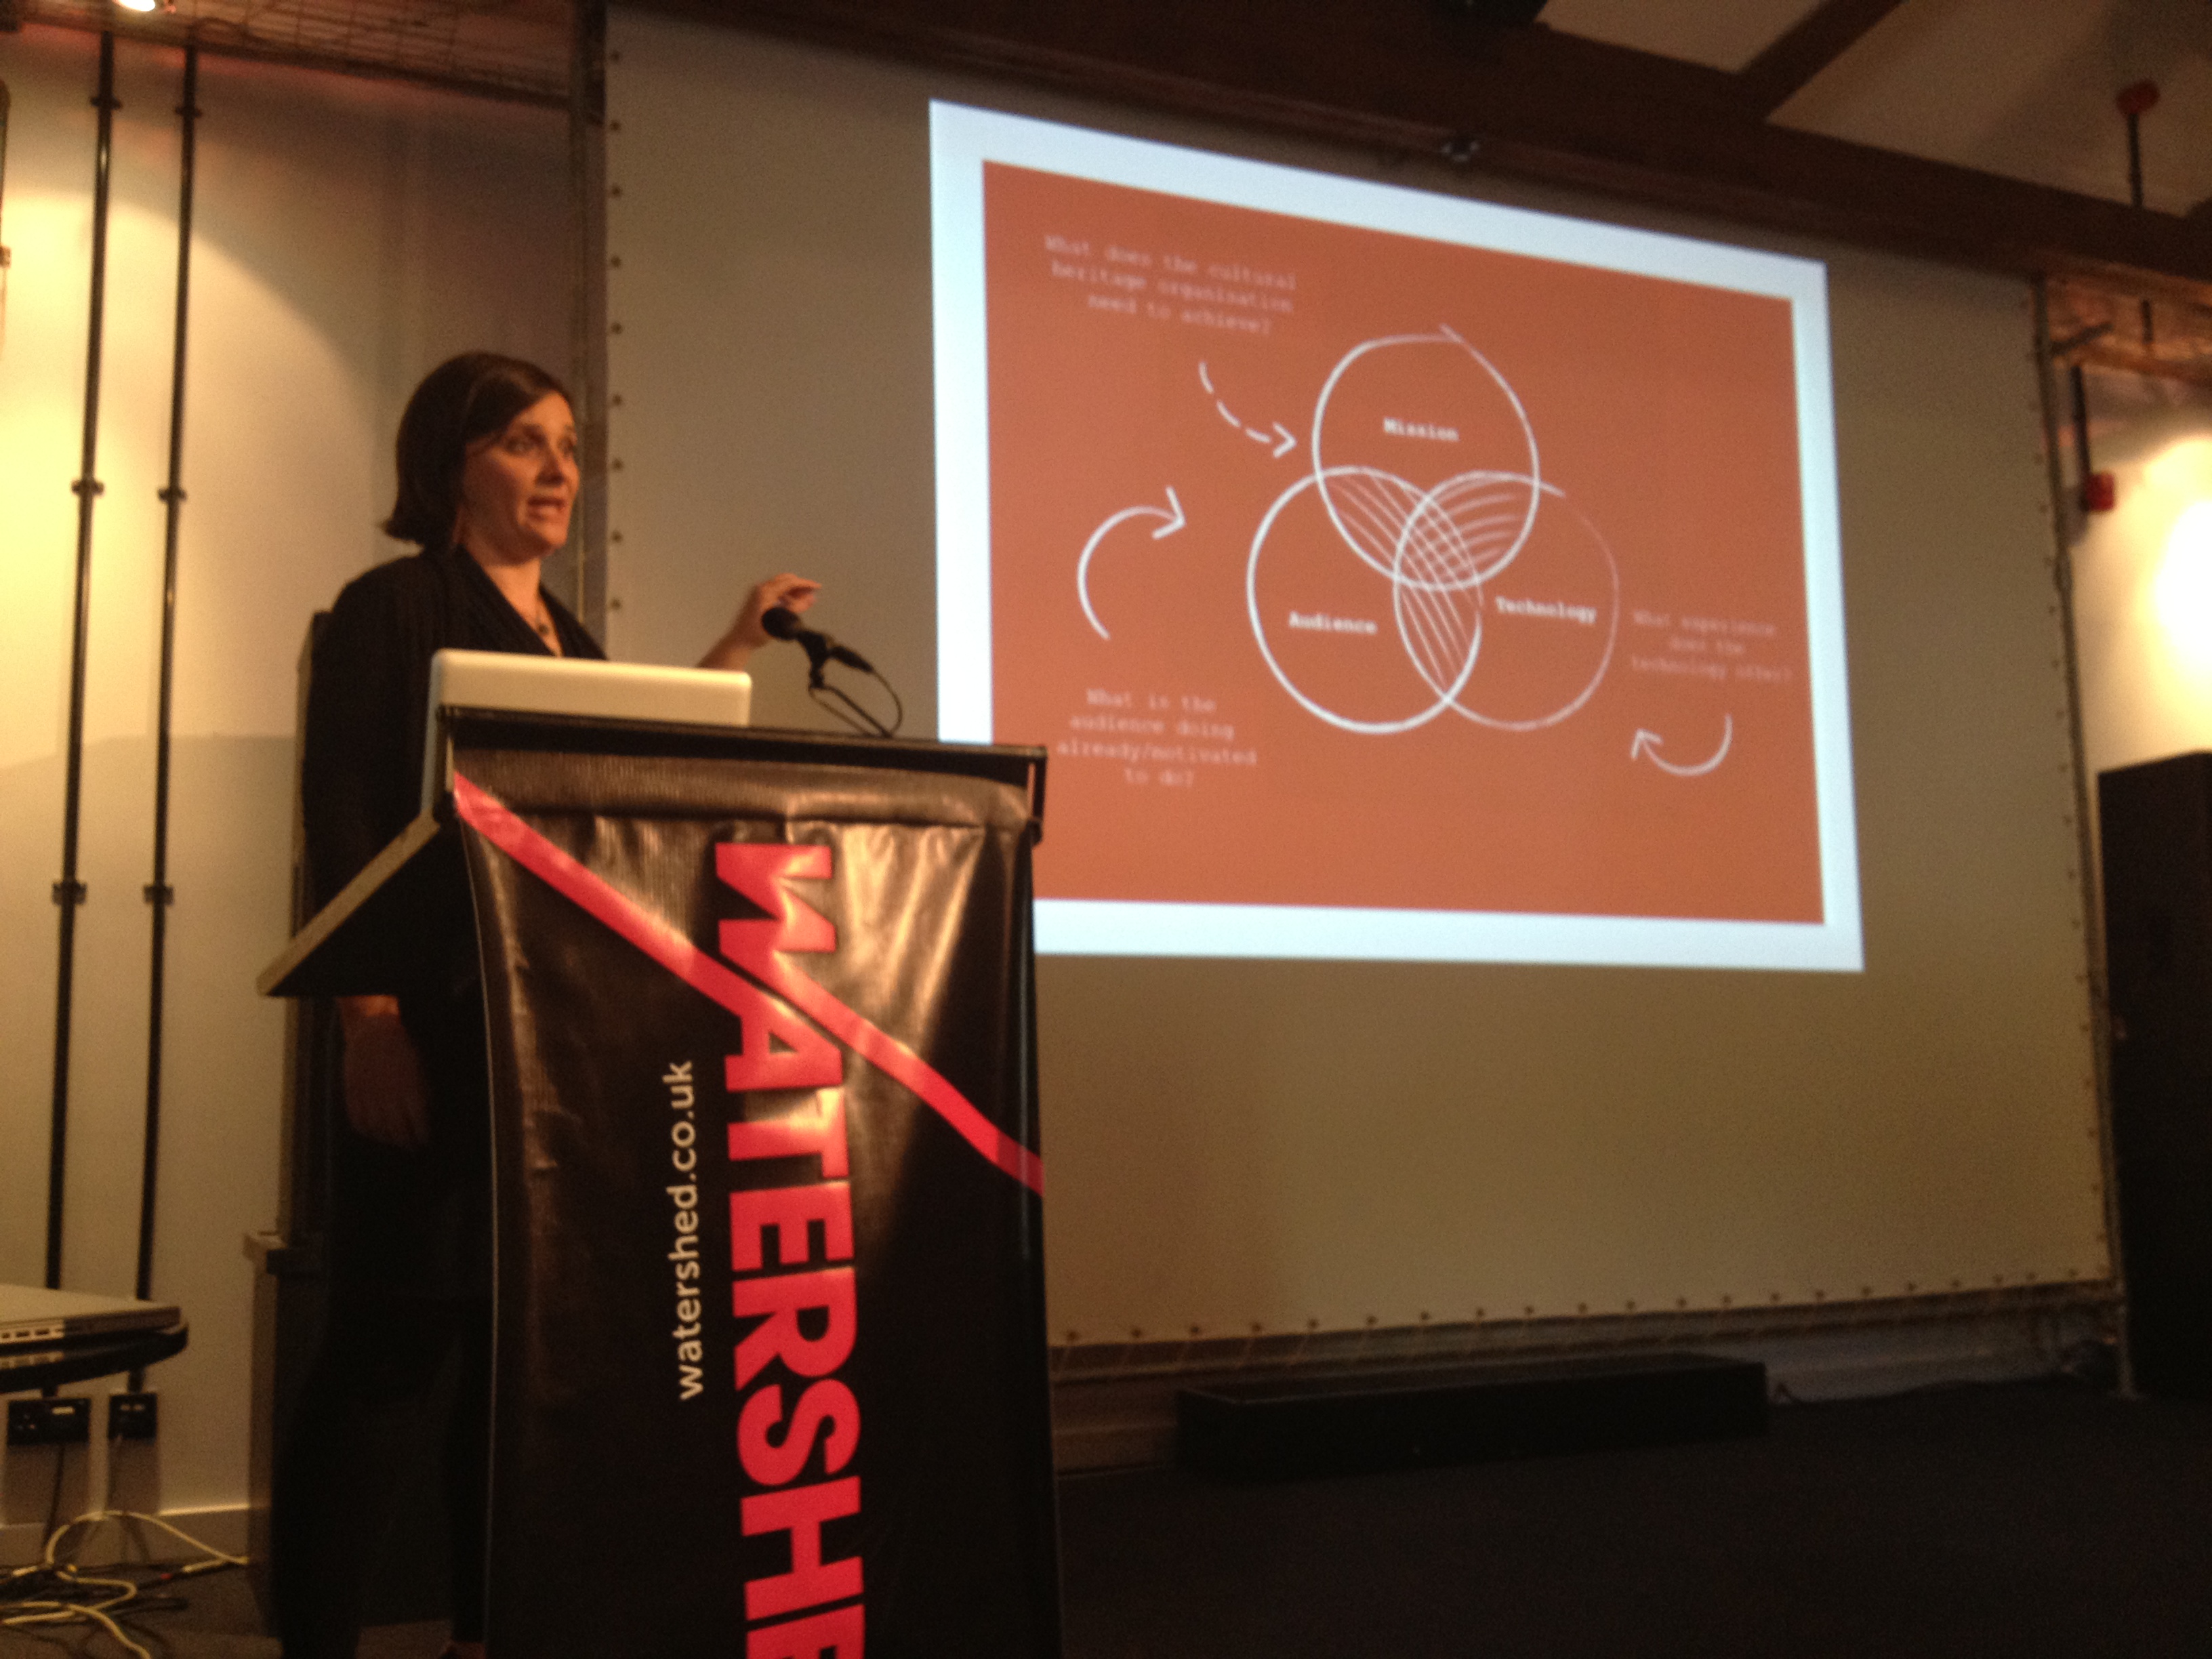 Lindsey Green- Everything changes: What can we learn from product development in